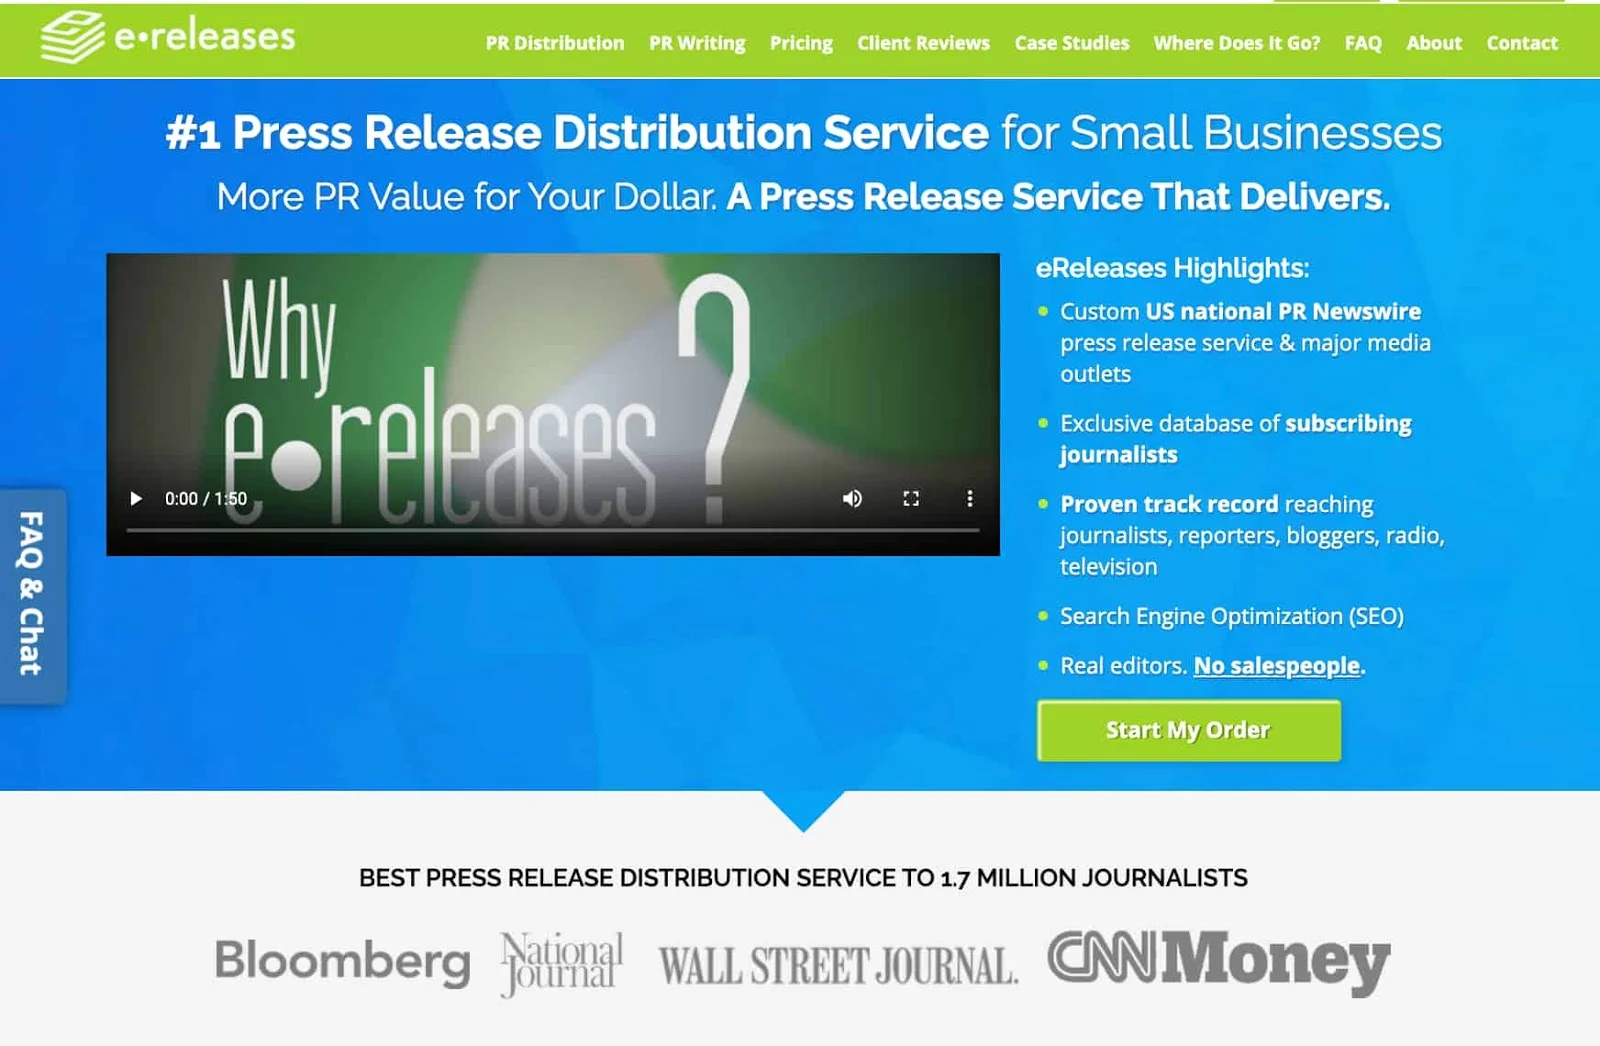 press release distribution 12 - Press Release Distribution: Top 11 Services + 4 Mistakes to Avoid